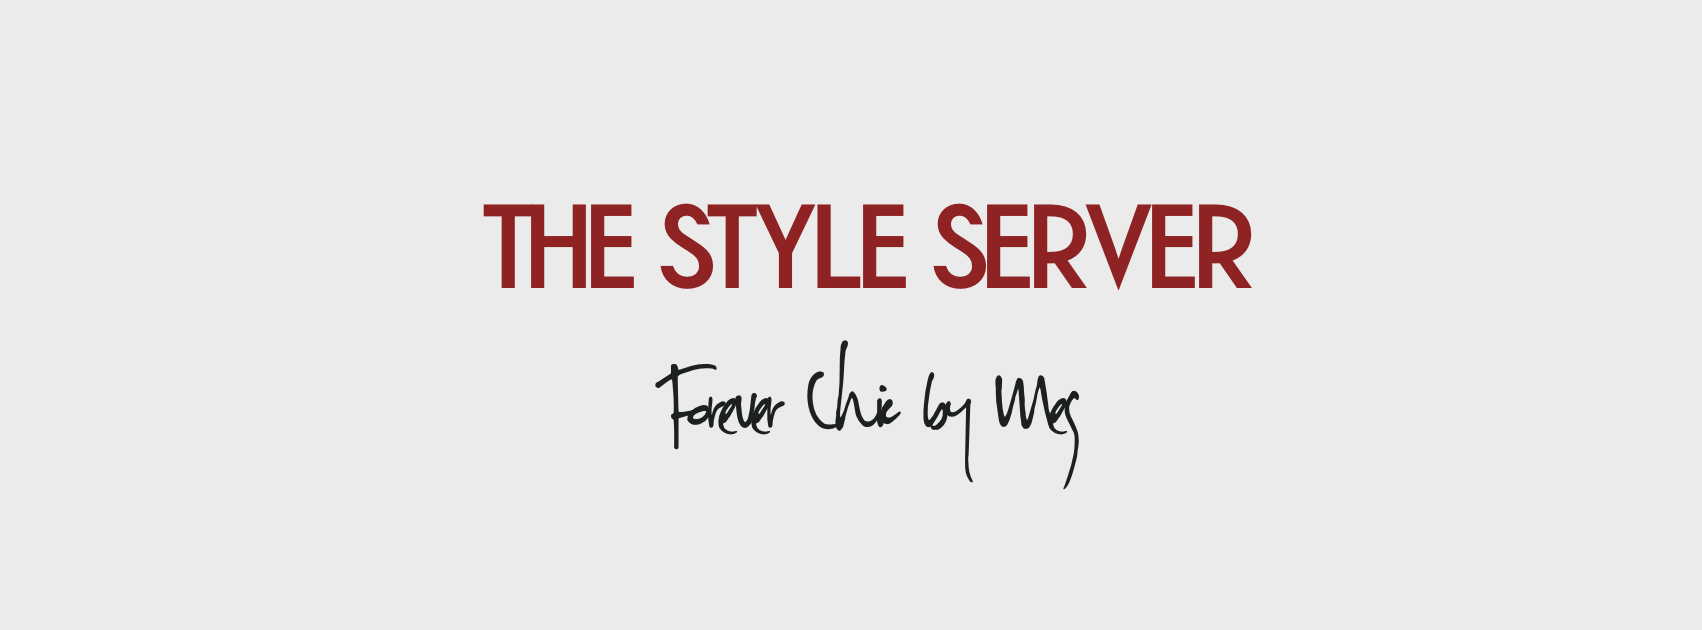 What is Your Personal Brand? My Personal Brand: Forever Chic! Forever Chic by Meg